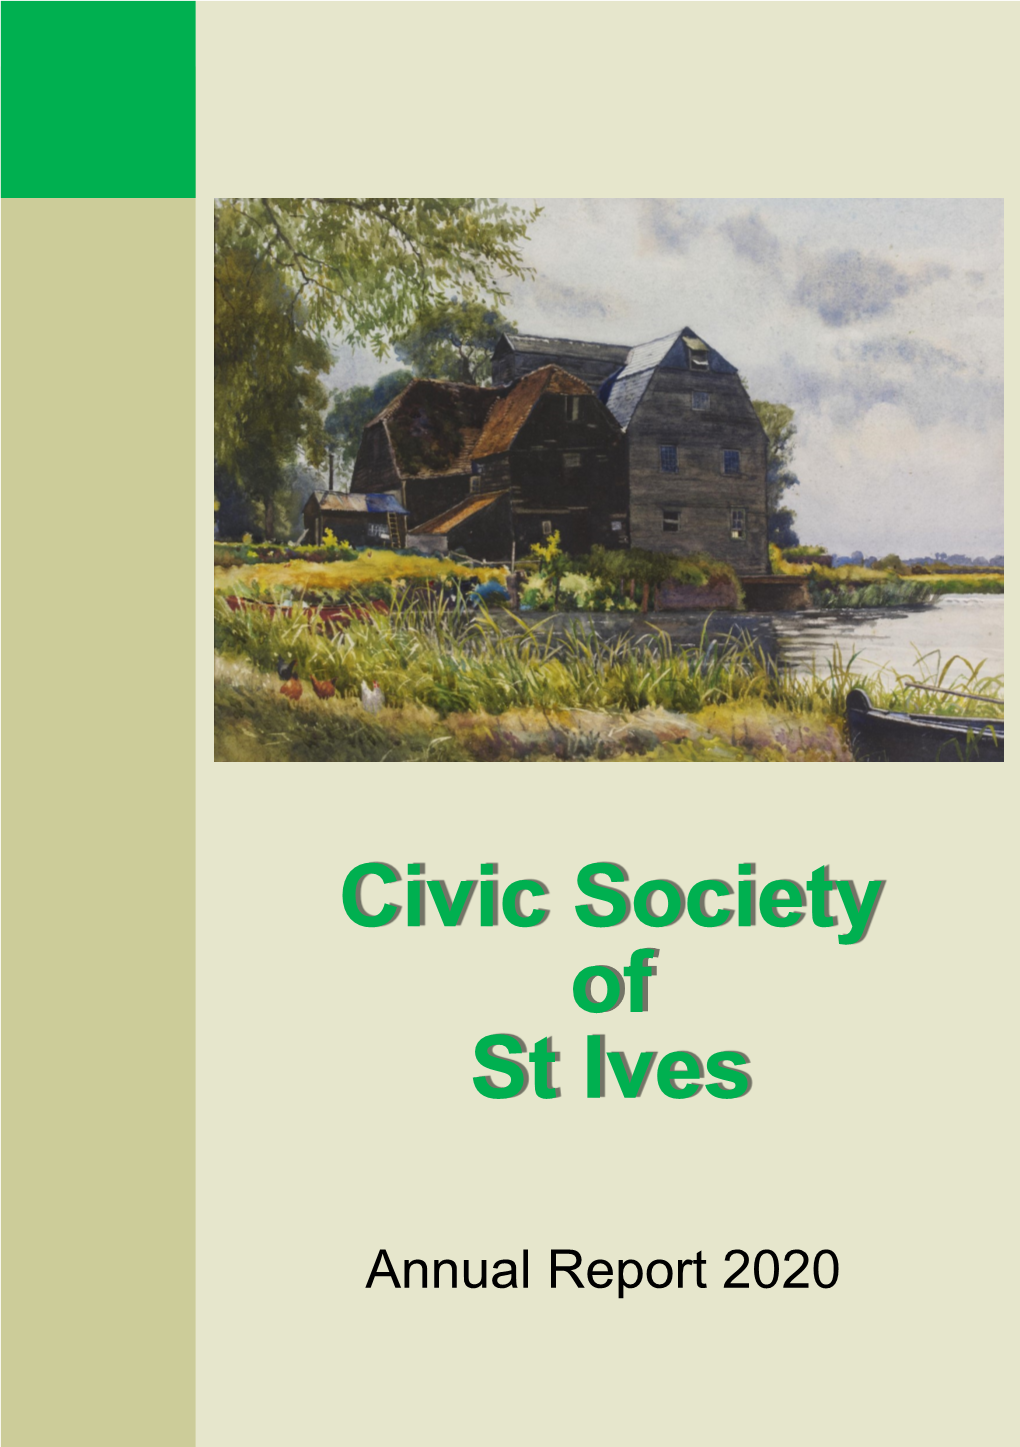 To Download the Latest Civic Society Annual Report As A